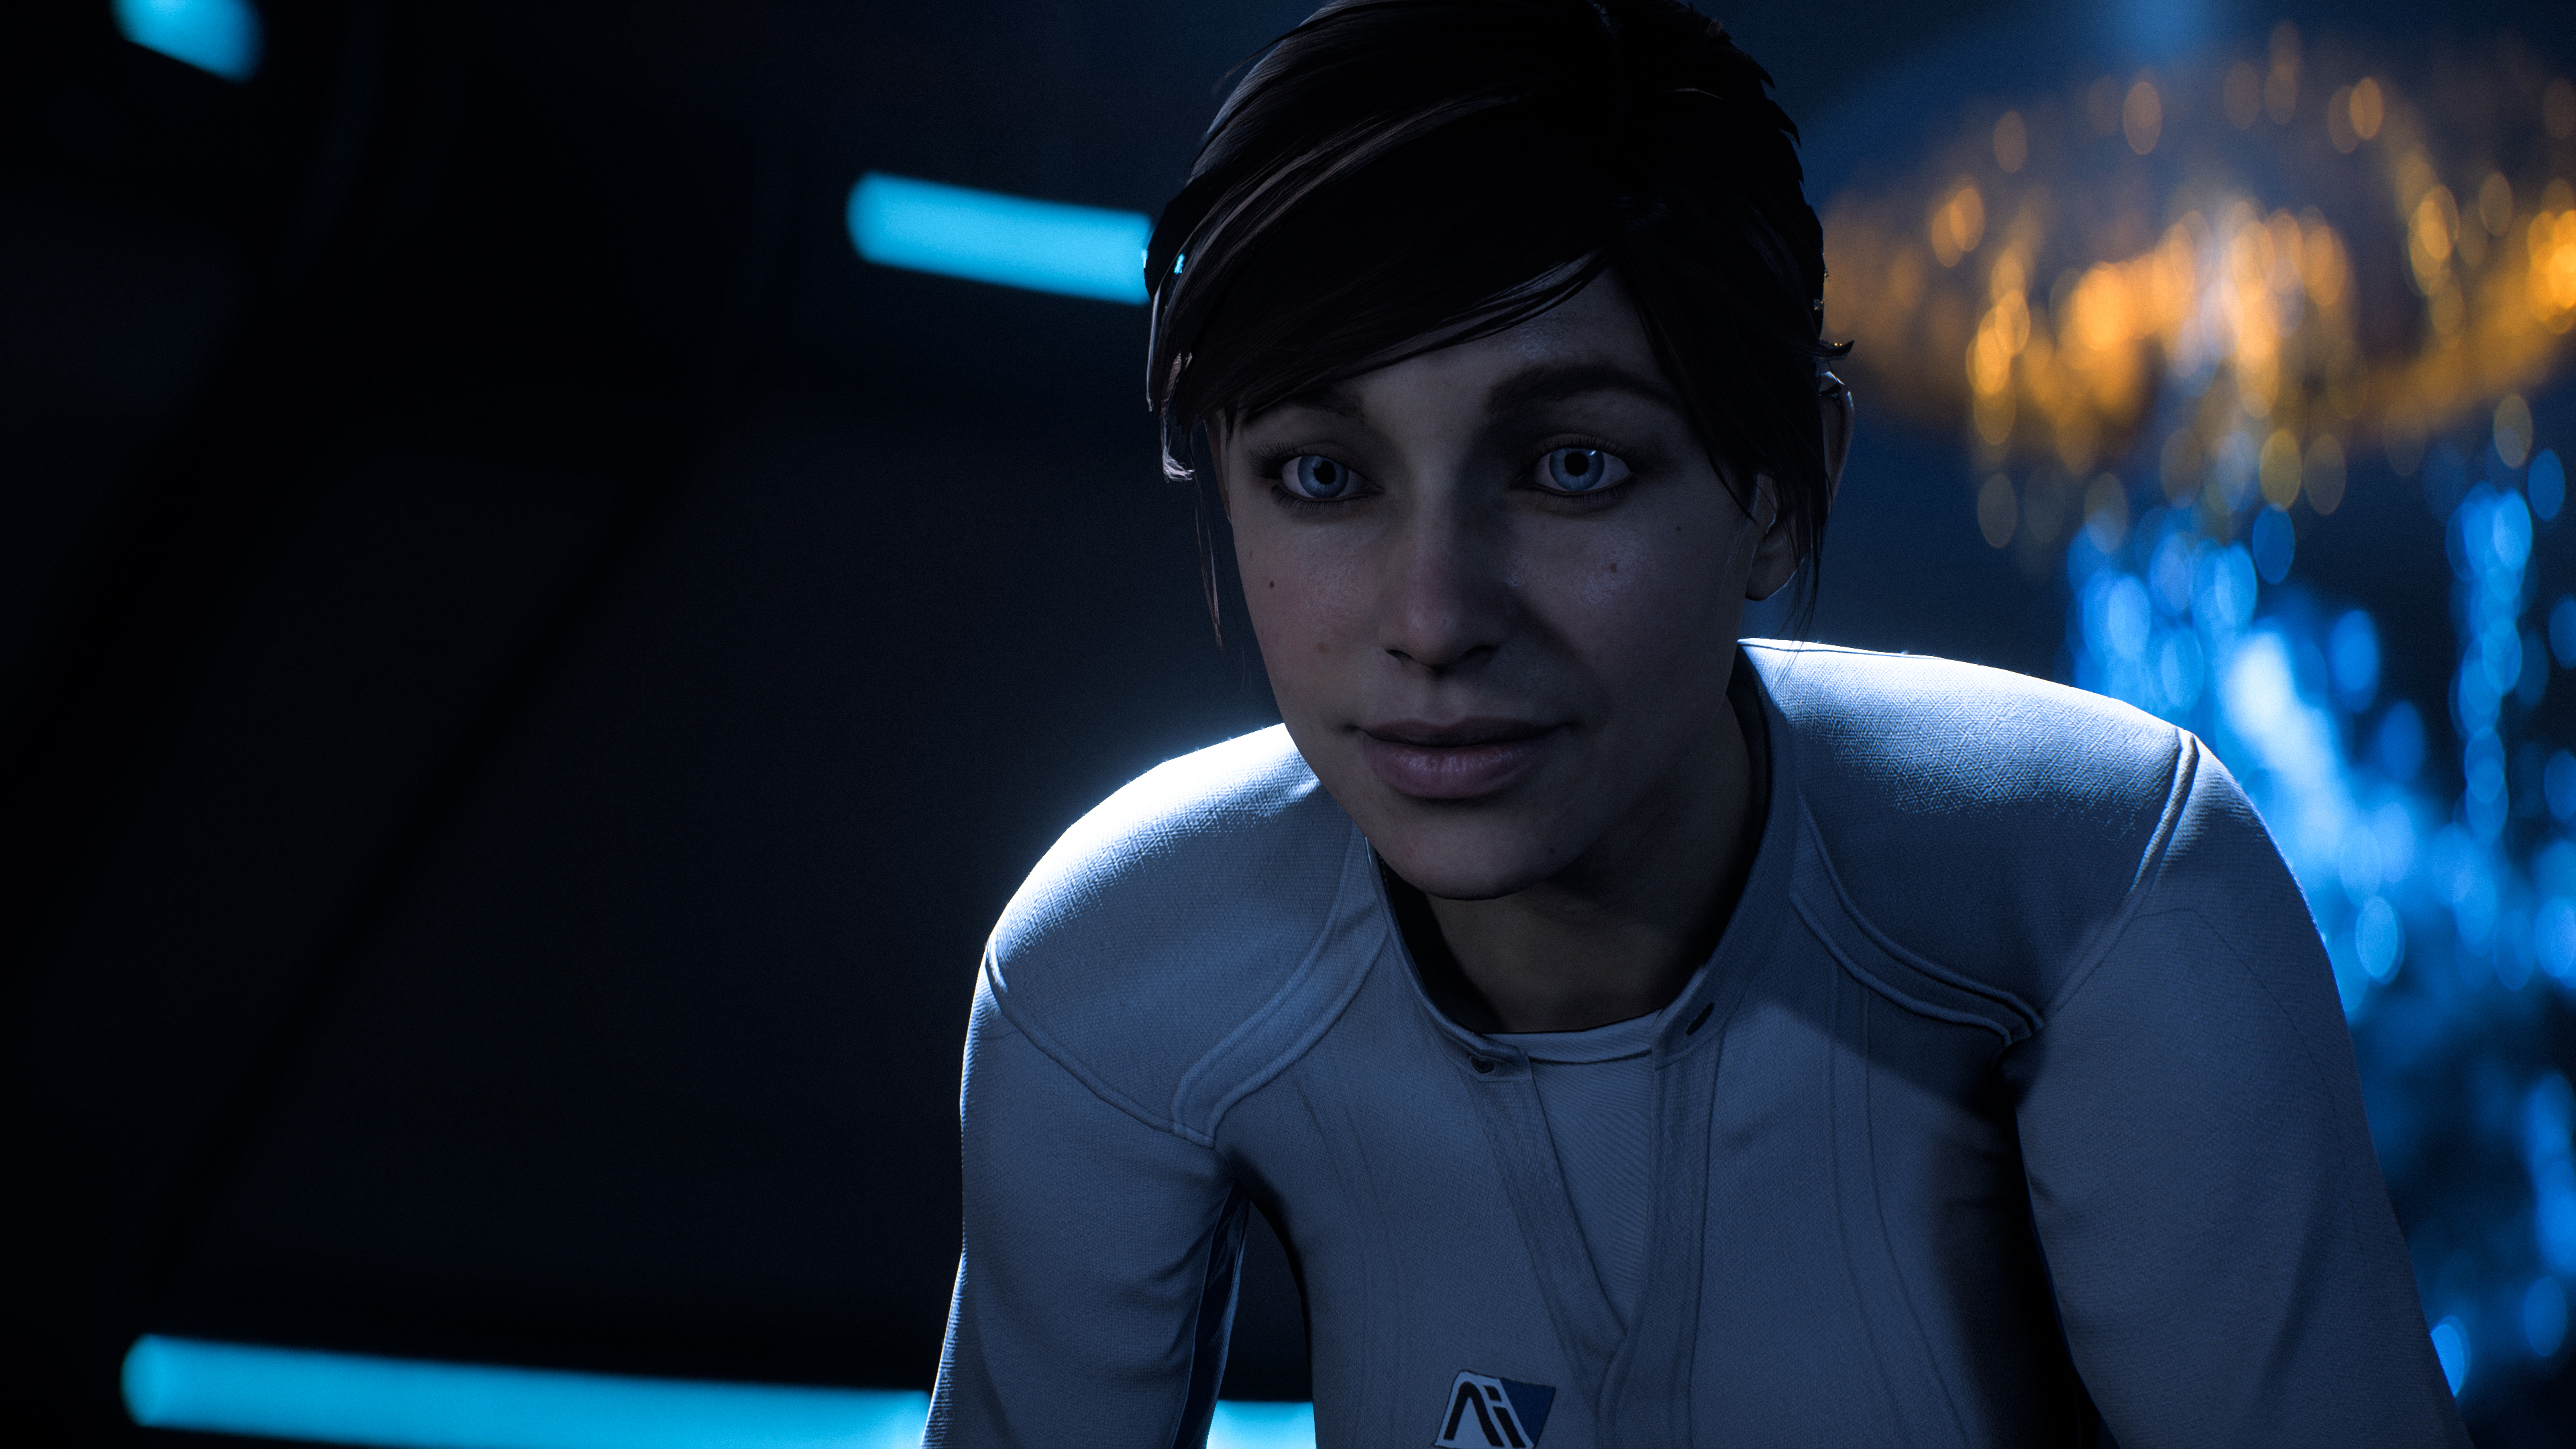 Mass Effect Andromeda Preview